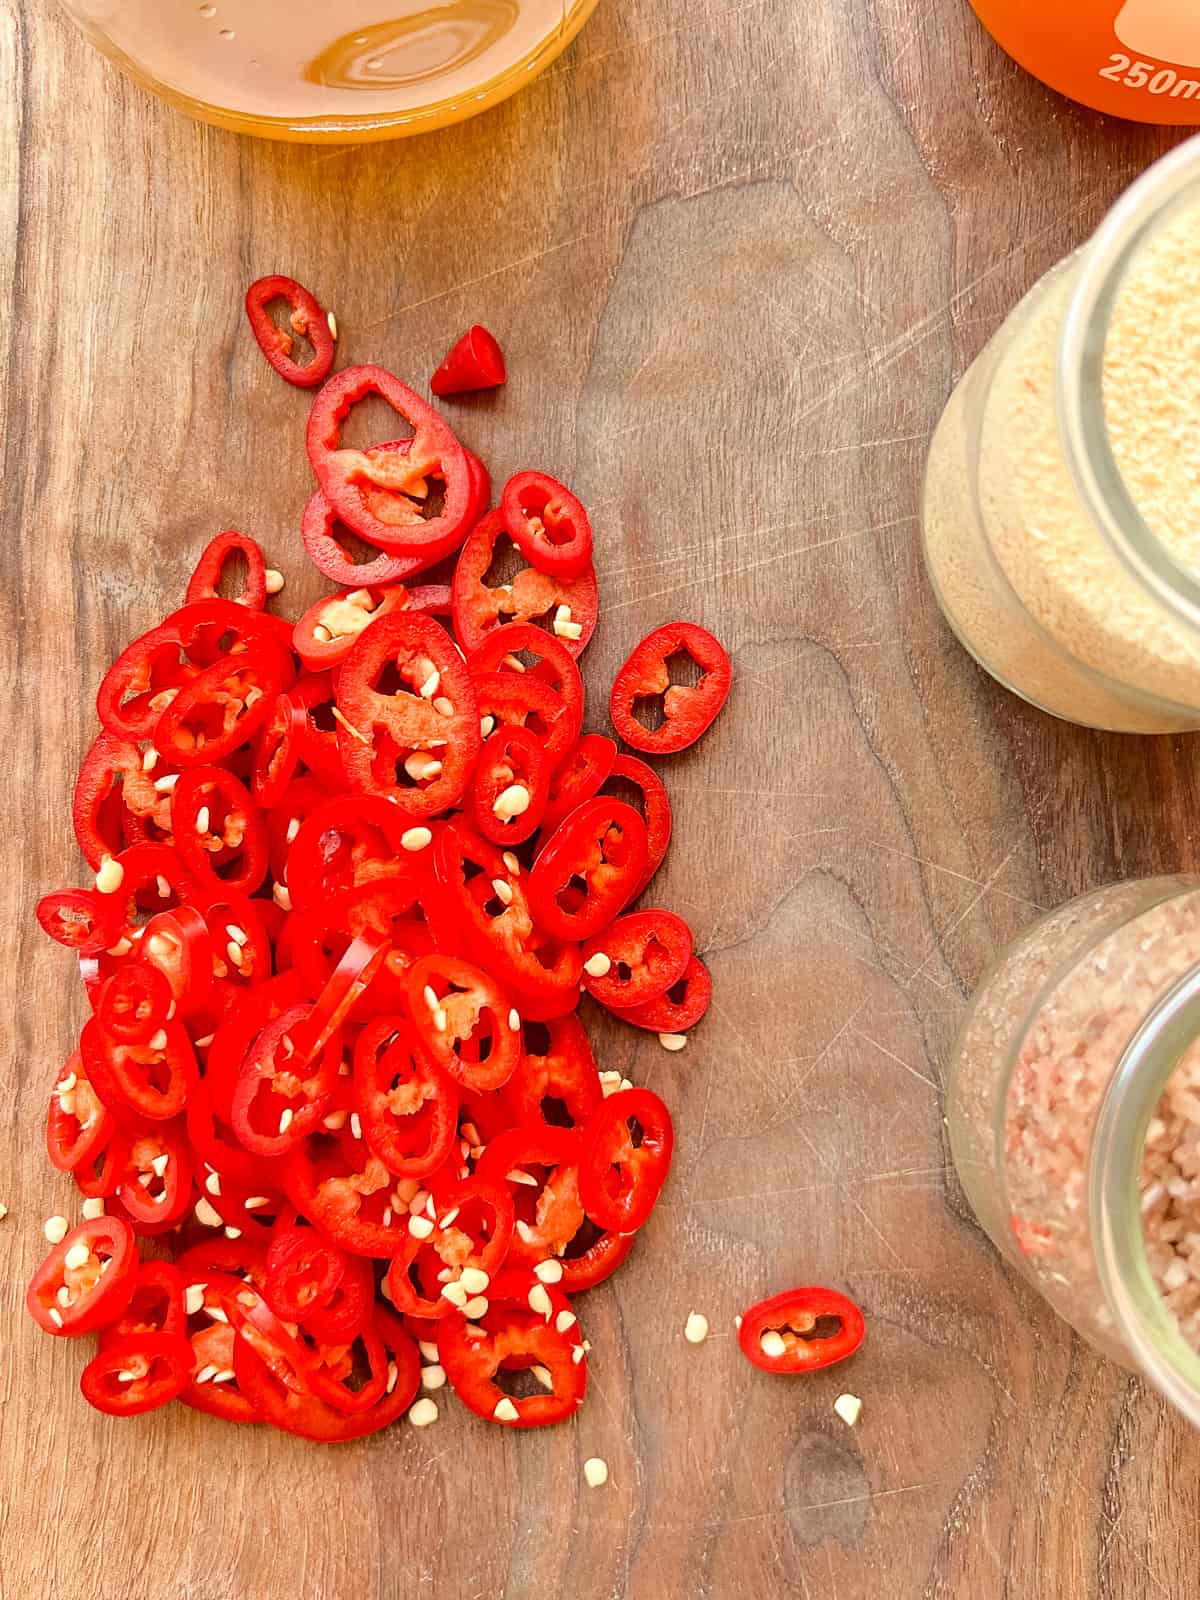 An image of sliced red chillies on a wooden cutting board.